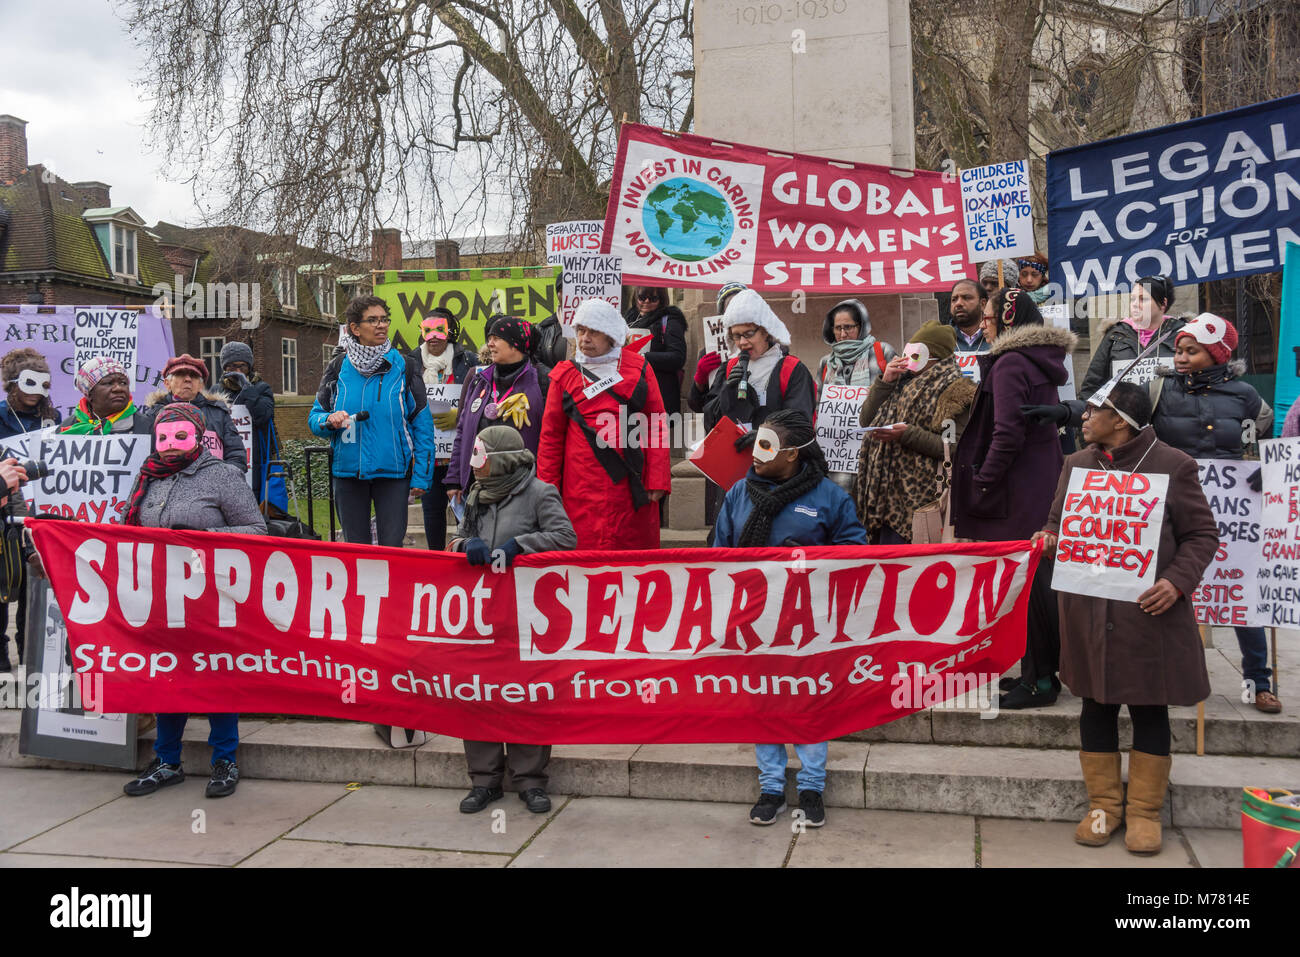 London, UK. 8th March 2018. People beind the main banner 'Support not Separation' at the Global Women's Strike mock trial of the Family Courts in an International Women’s Day protest in front of Parliament. Speakers included mothers who have had children unjustly removed and others who read out shocking comments made in court by judges. portionately aff Credit: Peter Marshall/Alamy Live News Stock Photo